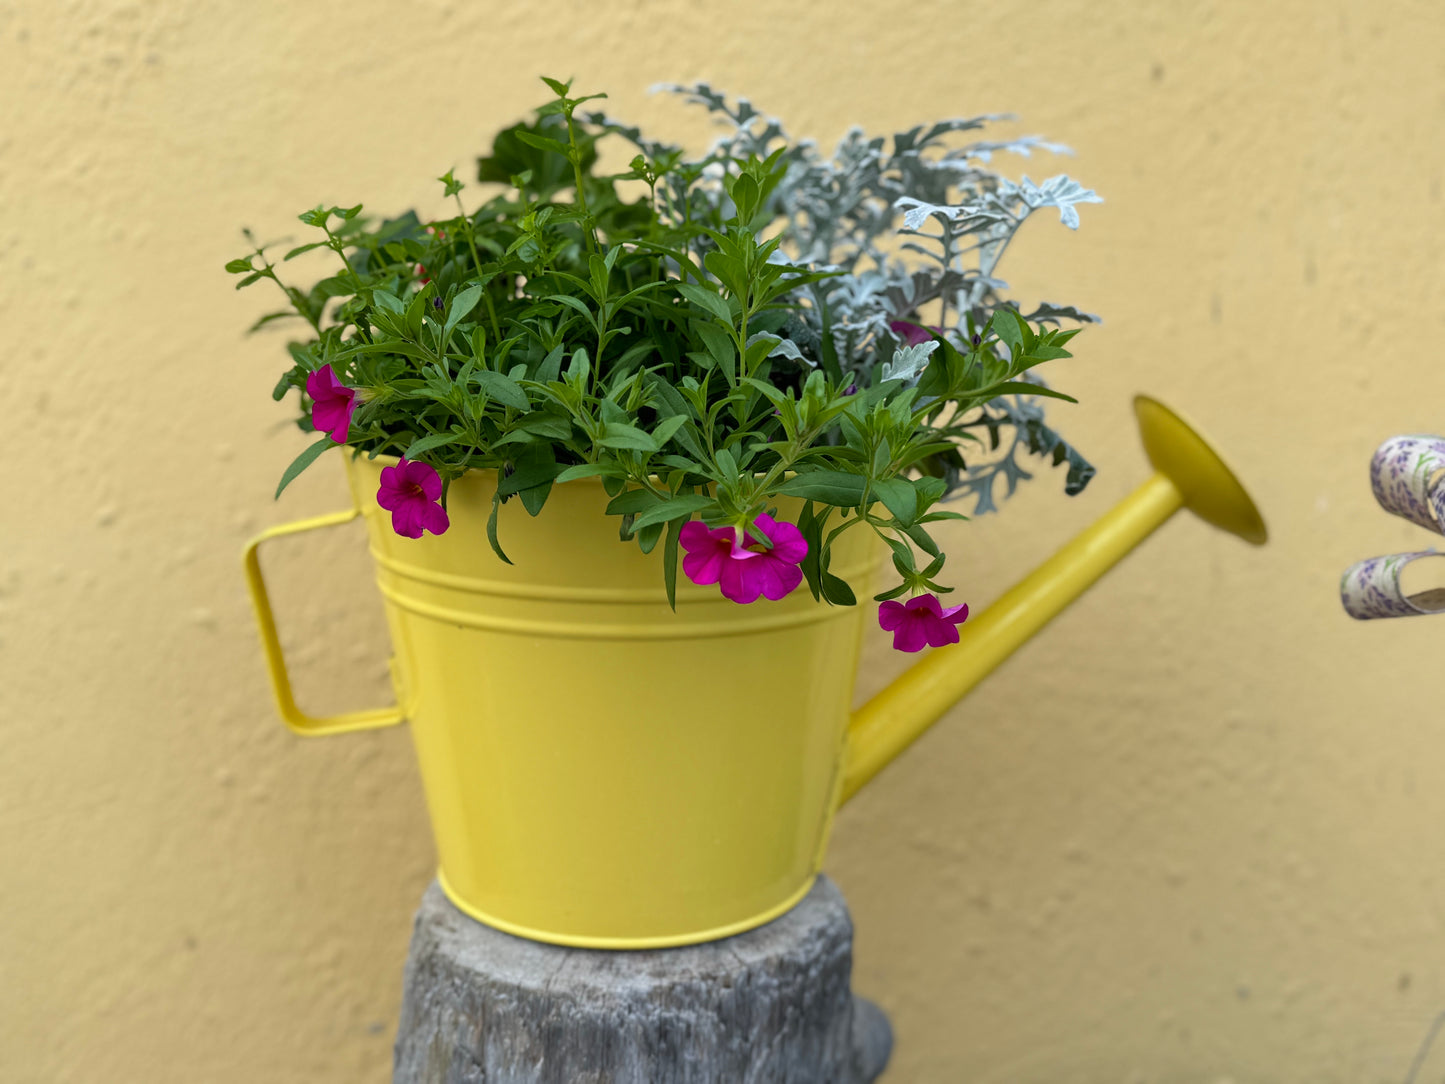 Flowering Plant in Giant Watering Can